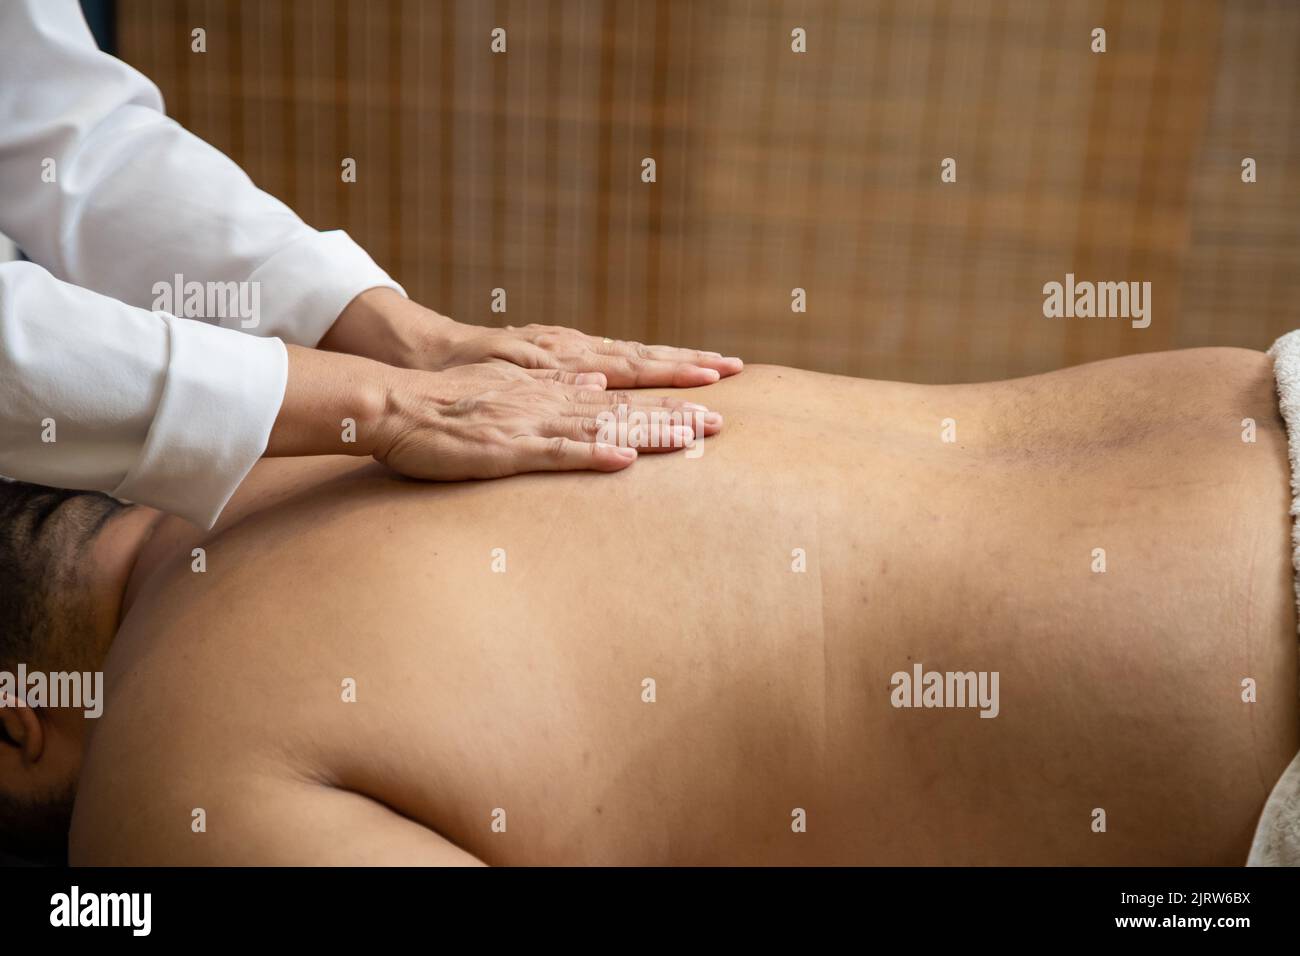 Goiânia, Goias, Brazil – July 18, 2022: A professional doing therapeutic massage on the back of the patient who is lying on the stretcher. Stock Photo